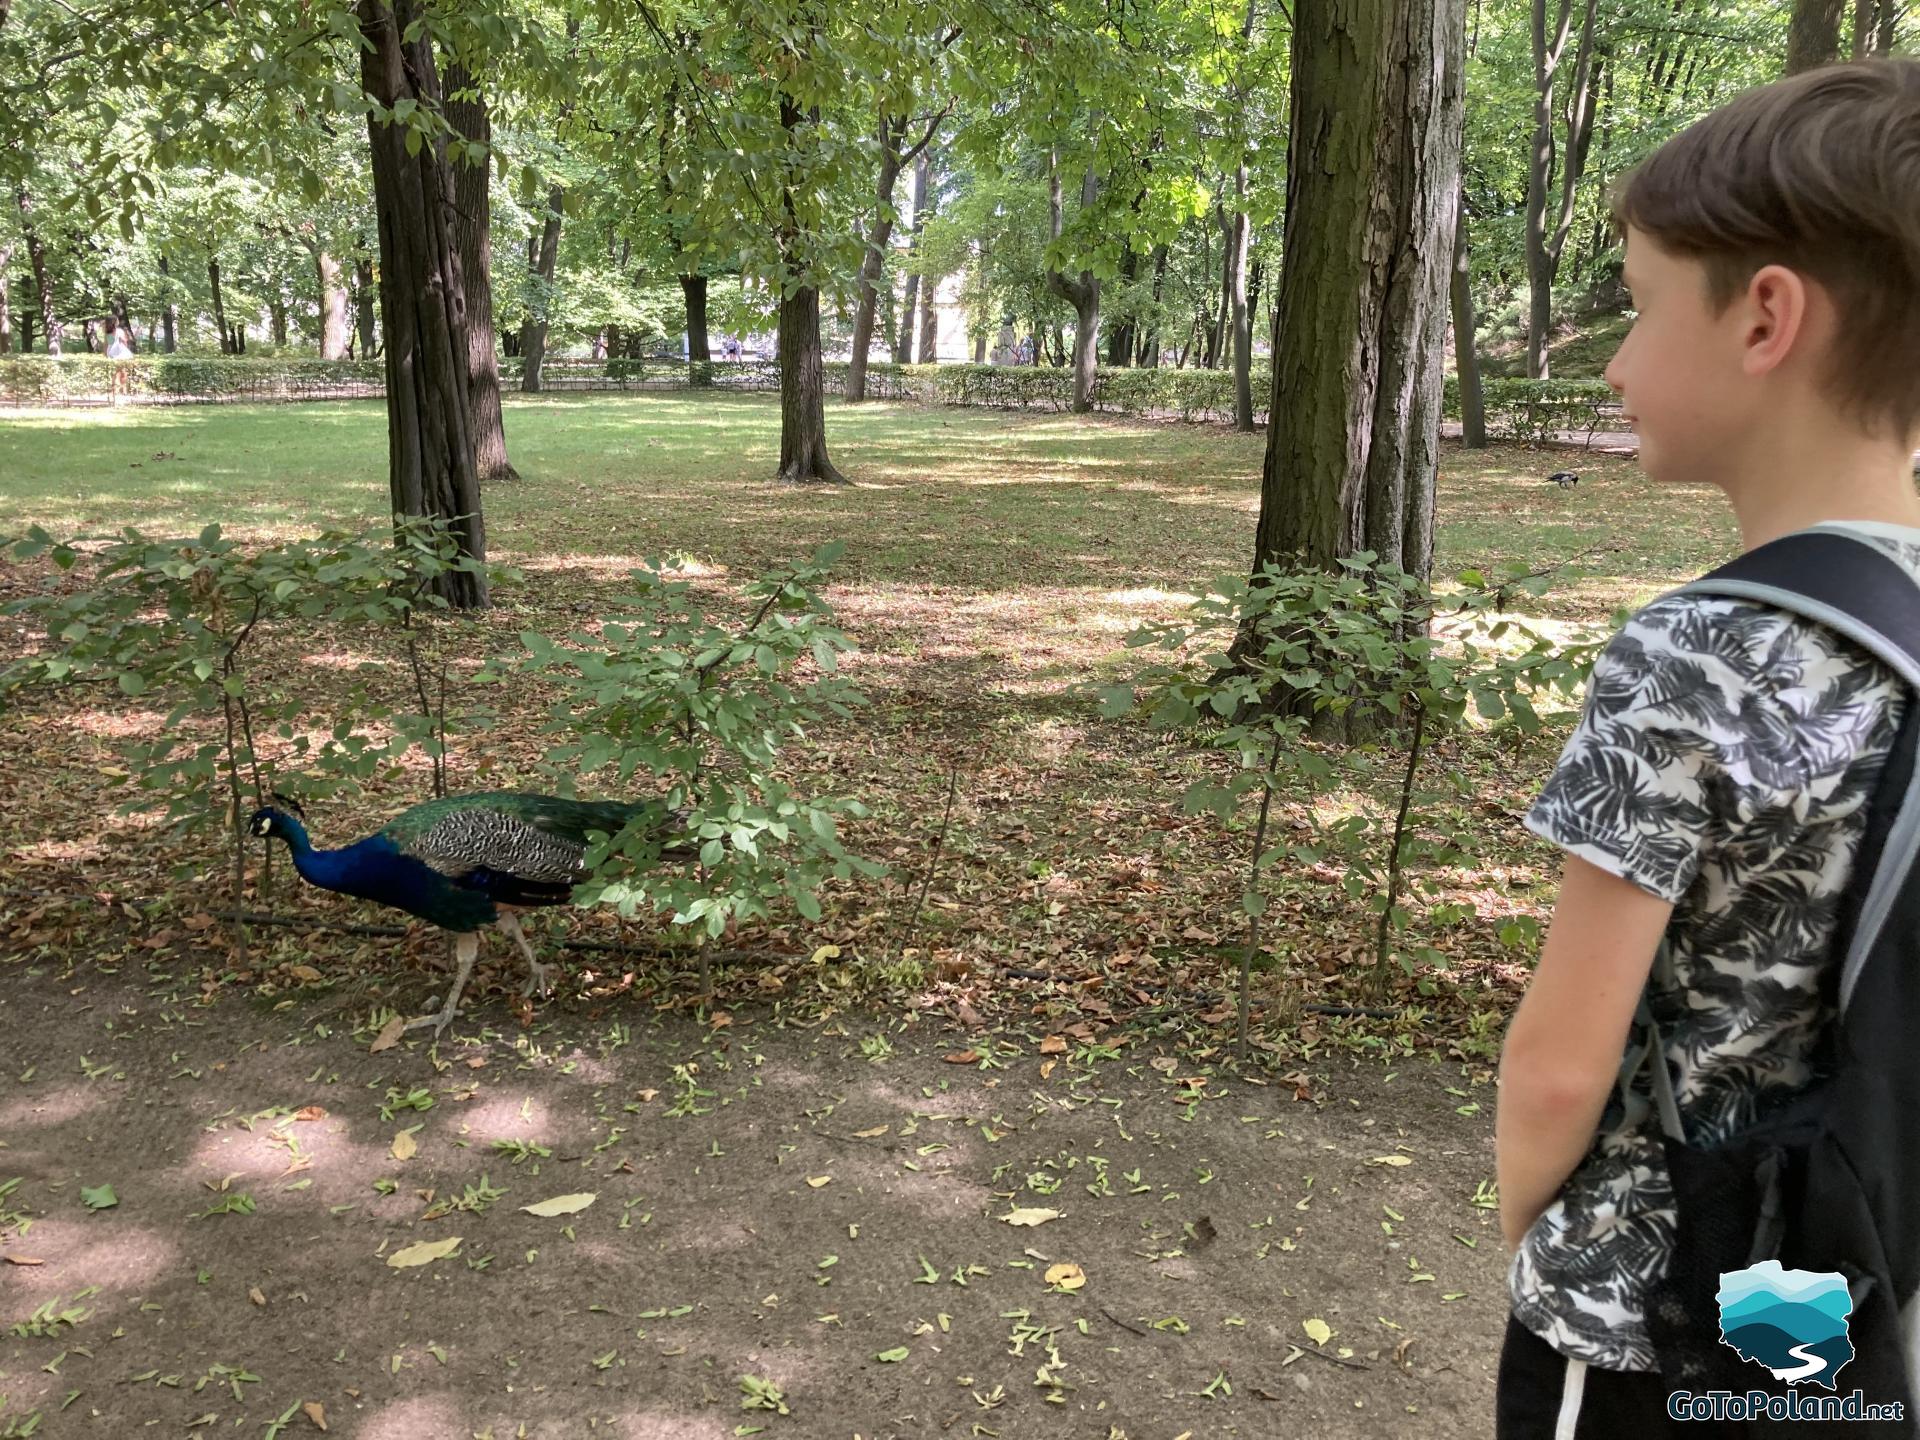 a boy is watching a peacock in a park